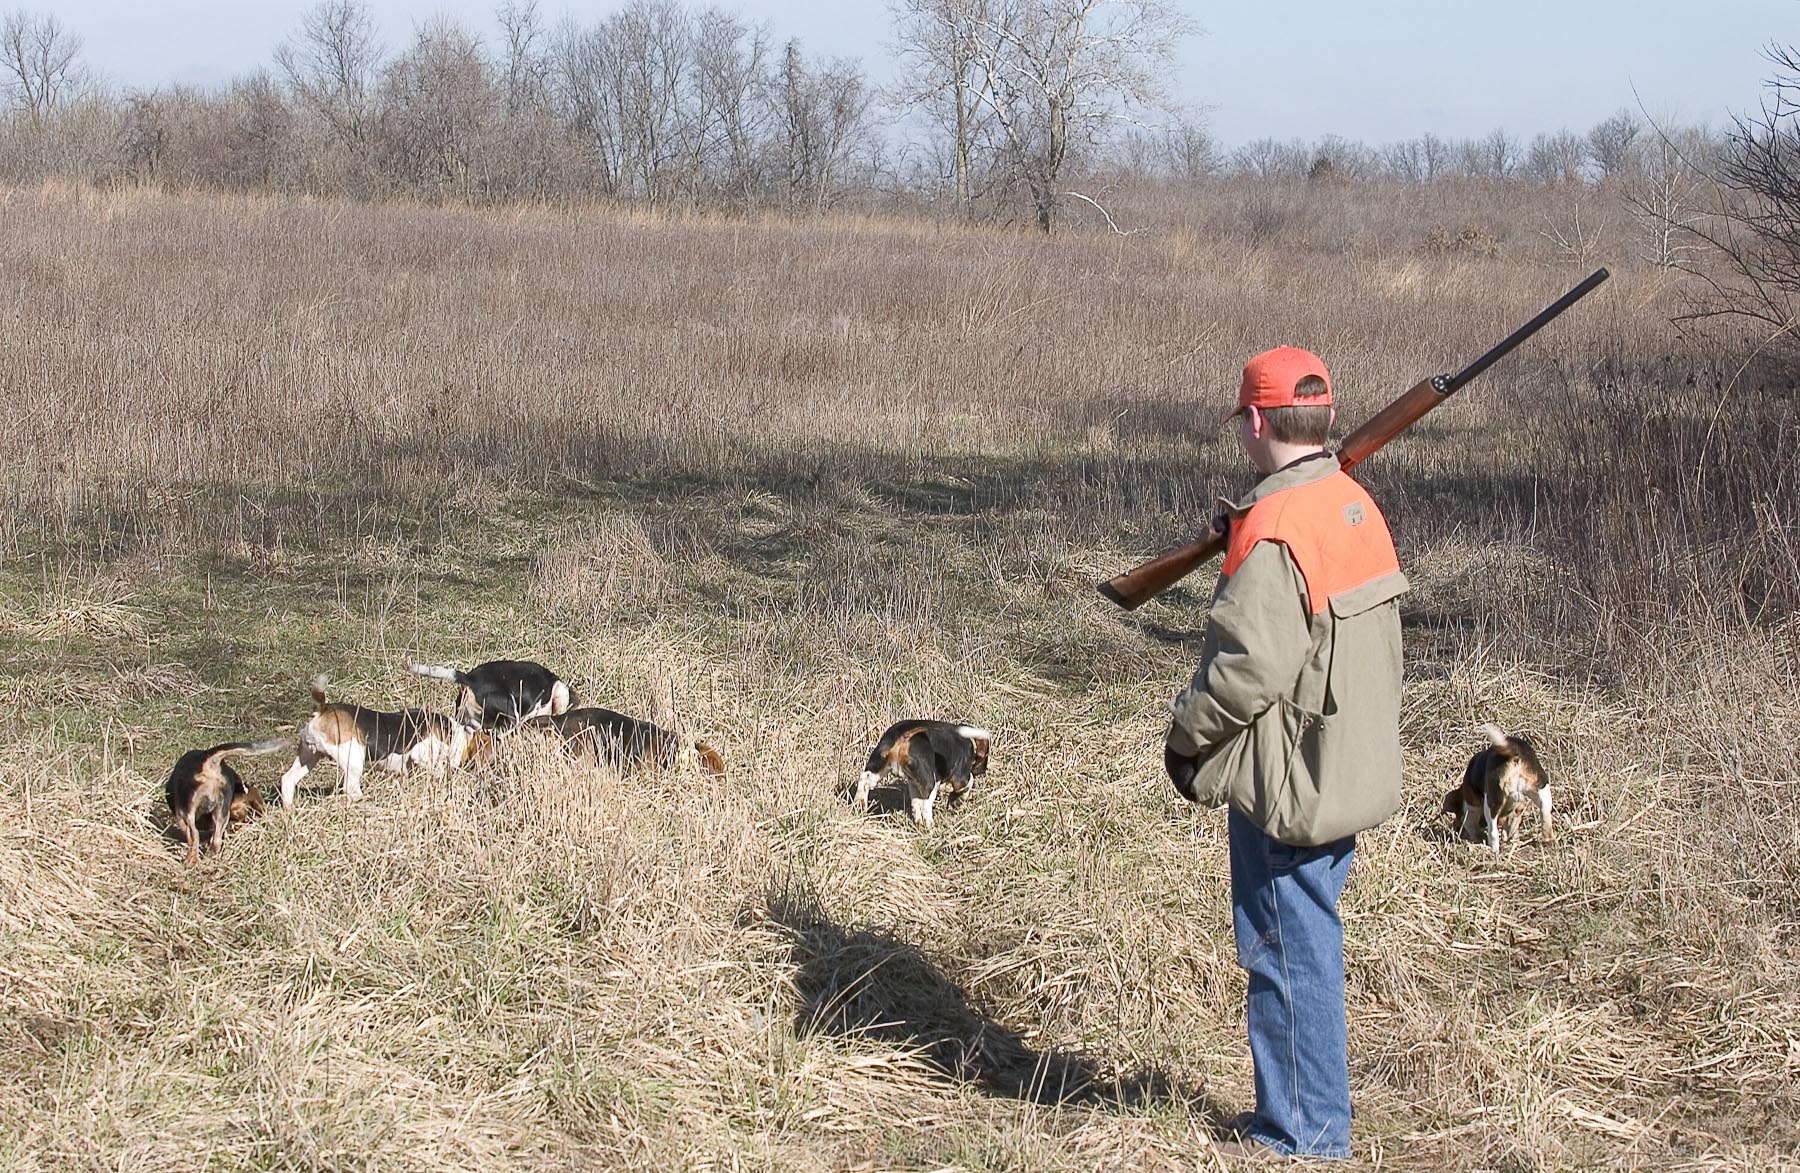 A hunter with gun on shoulder watches beagles search for rabbit scent.